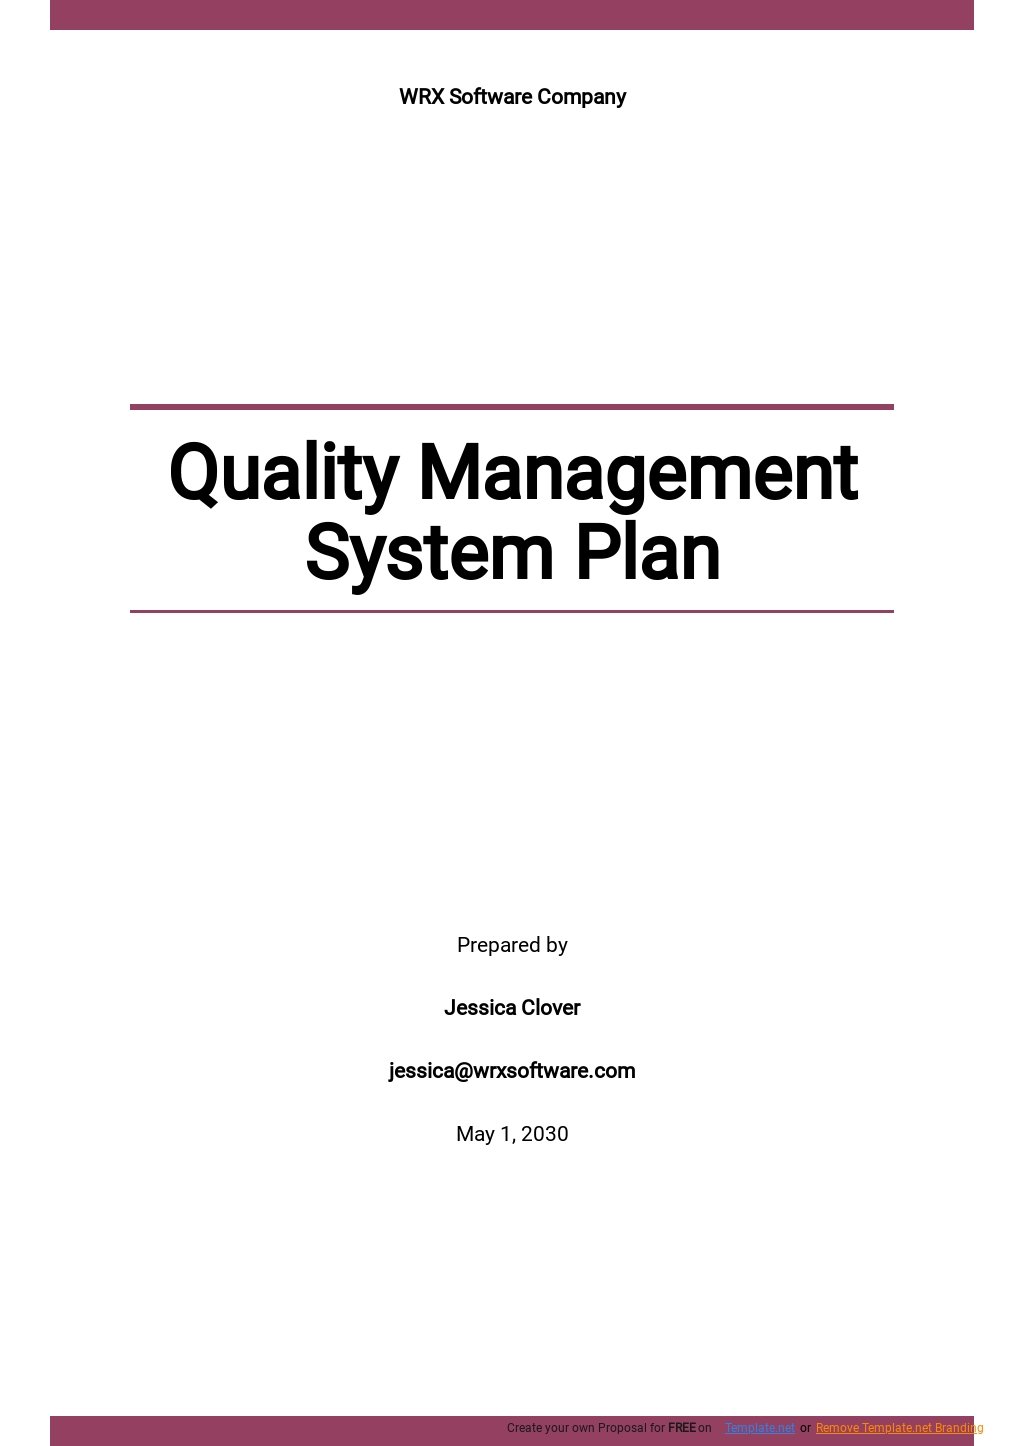 Quality Management Plan Template Word